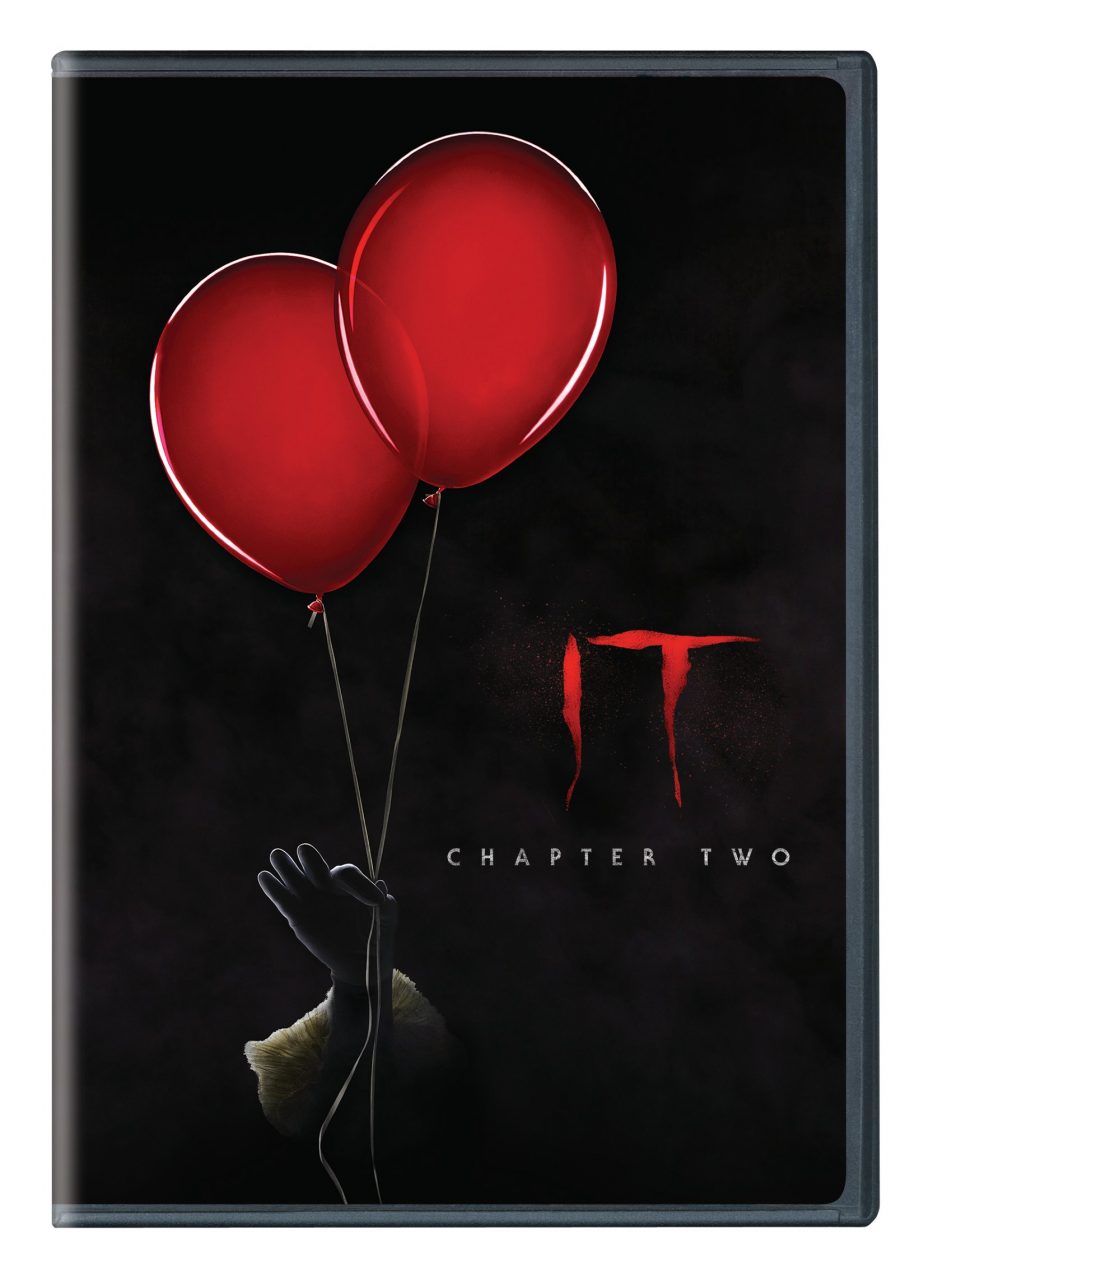 IT: Chapter 2 DVD cover (Warner Bros. Home Entertainment)